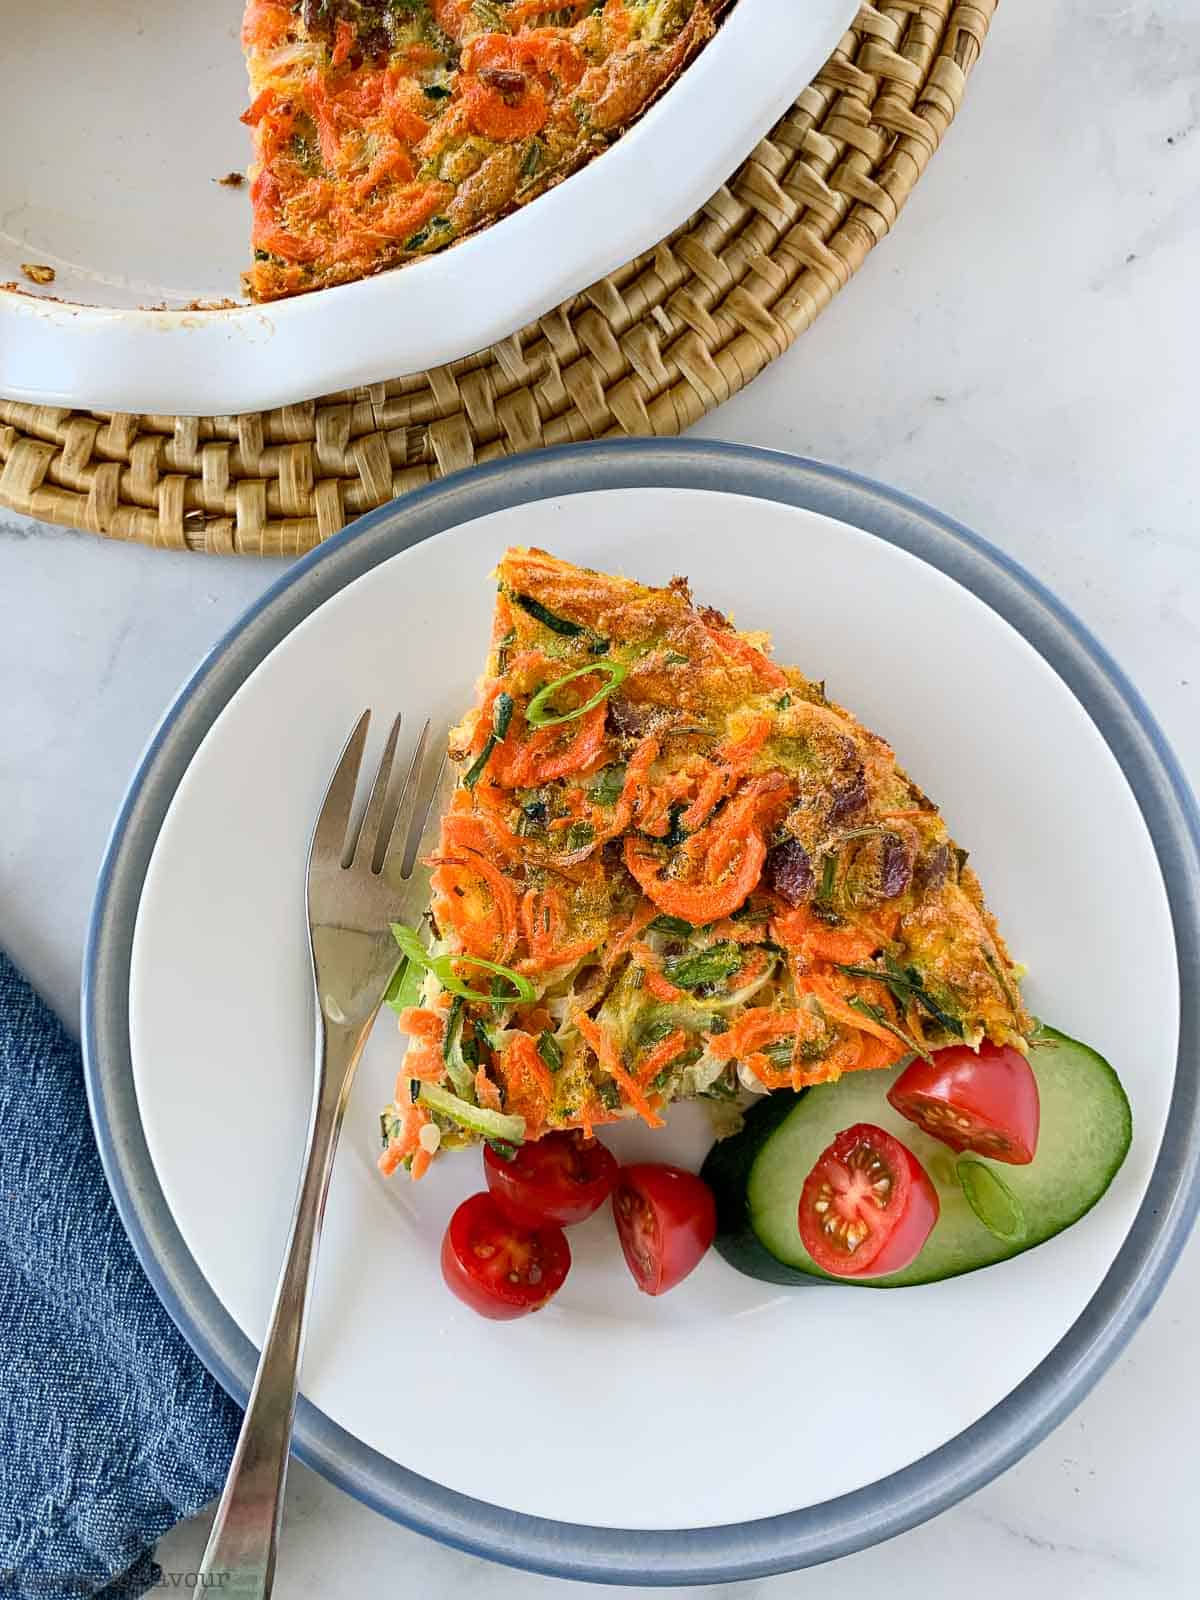 A wedge of zucchini carrot quiche on a plate with cucumber and tomatoes.